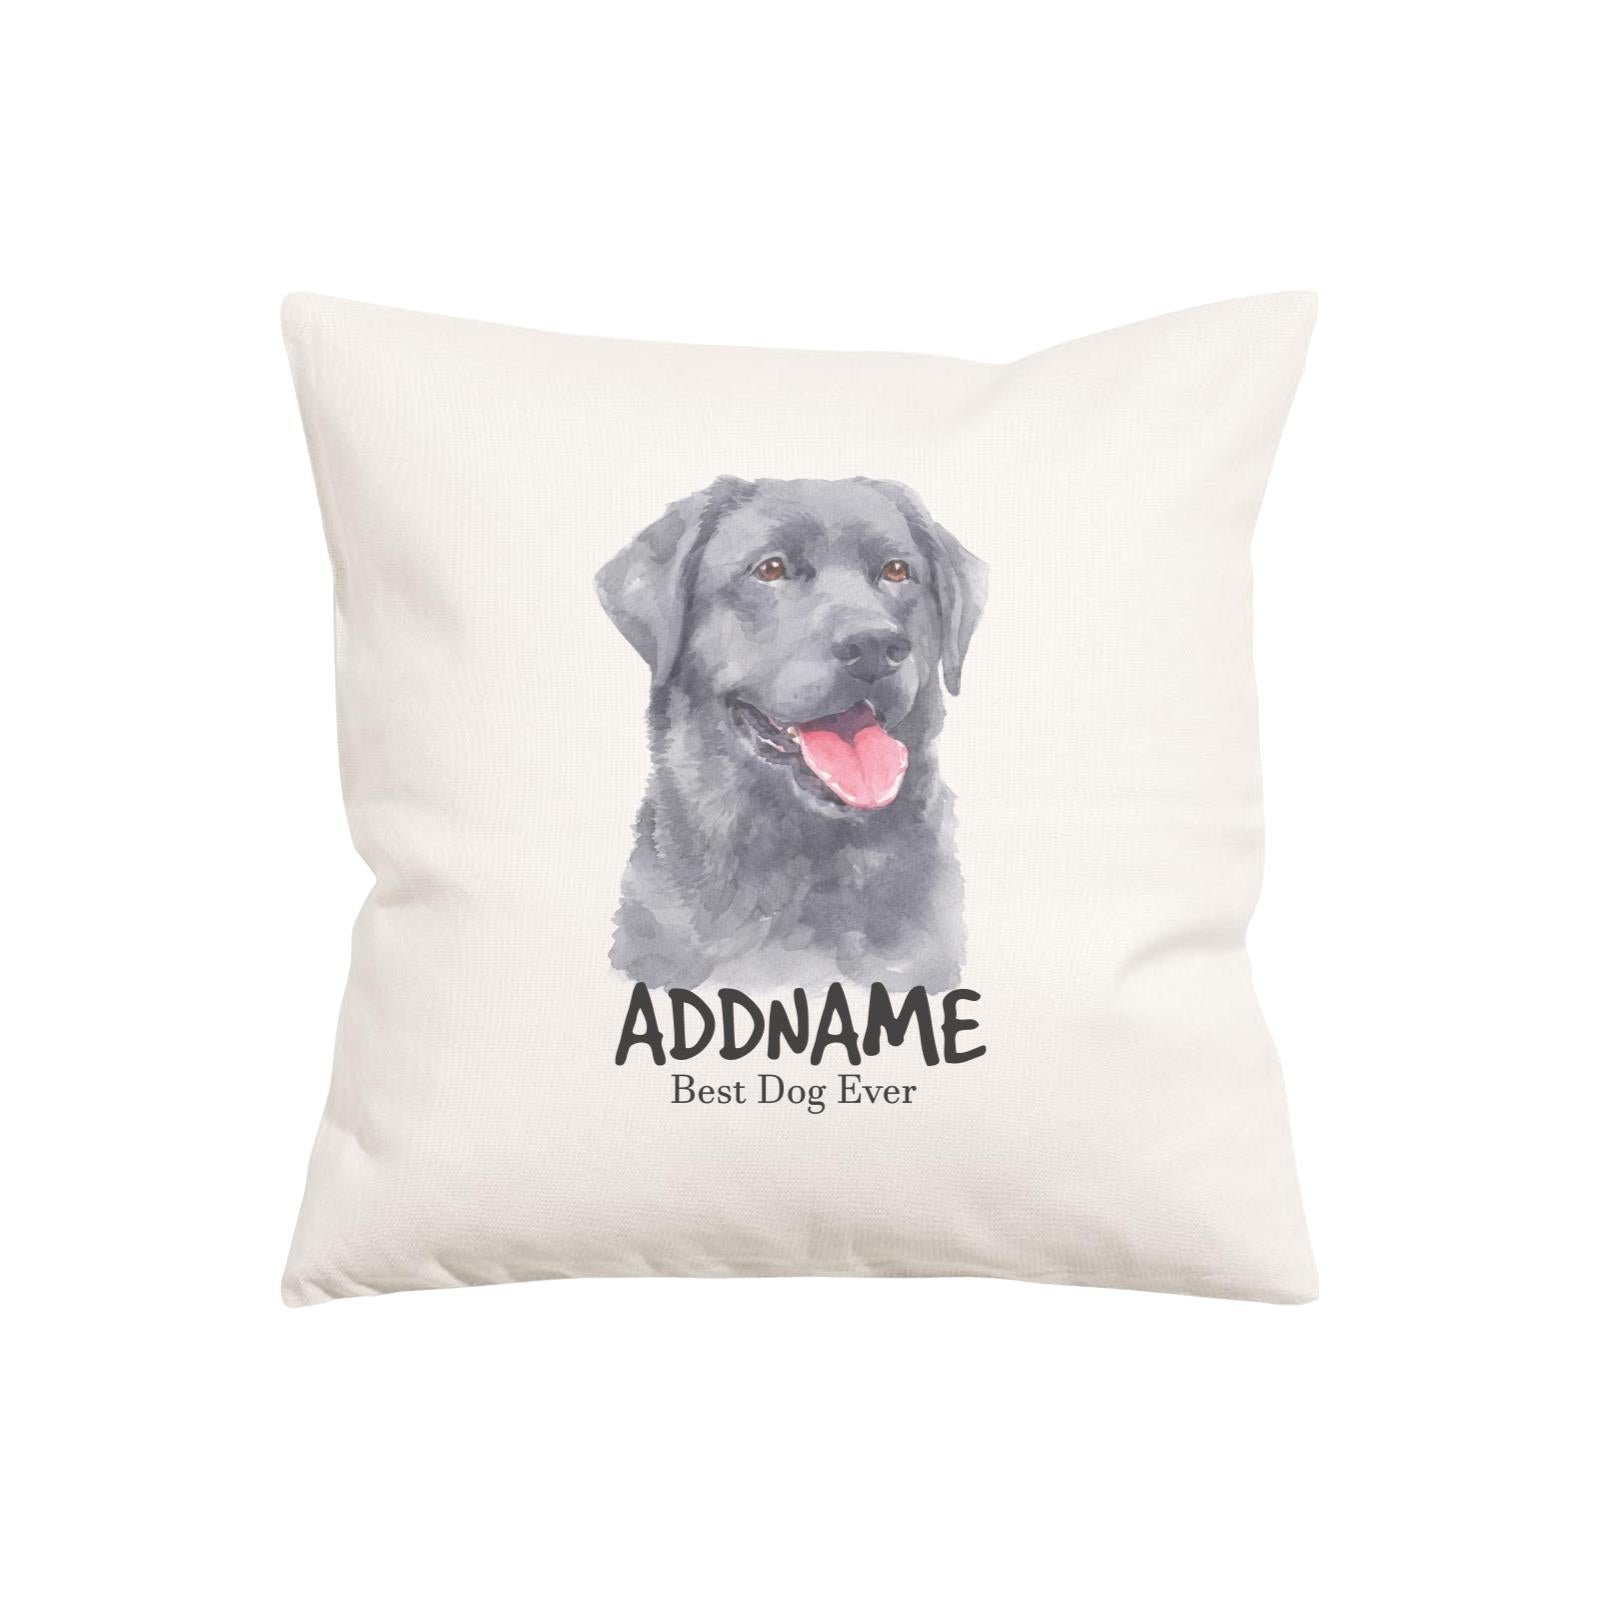 Watercolor Dog Series Labrador Black Best Dog Ever Addname Pillow Cushion